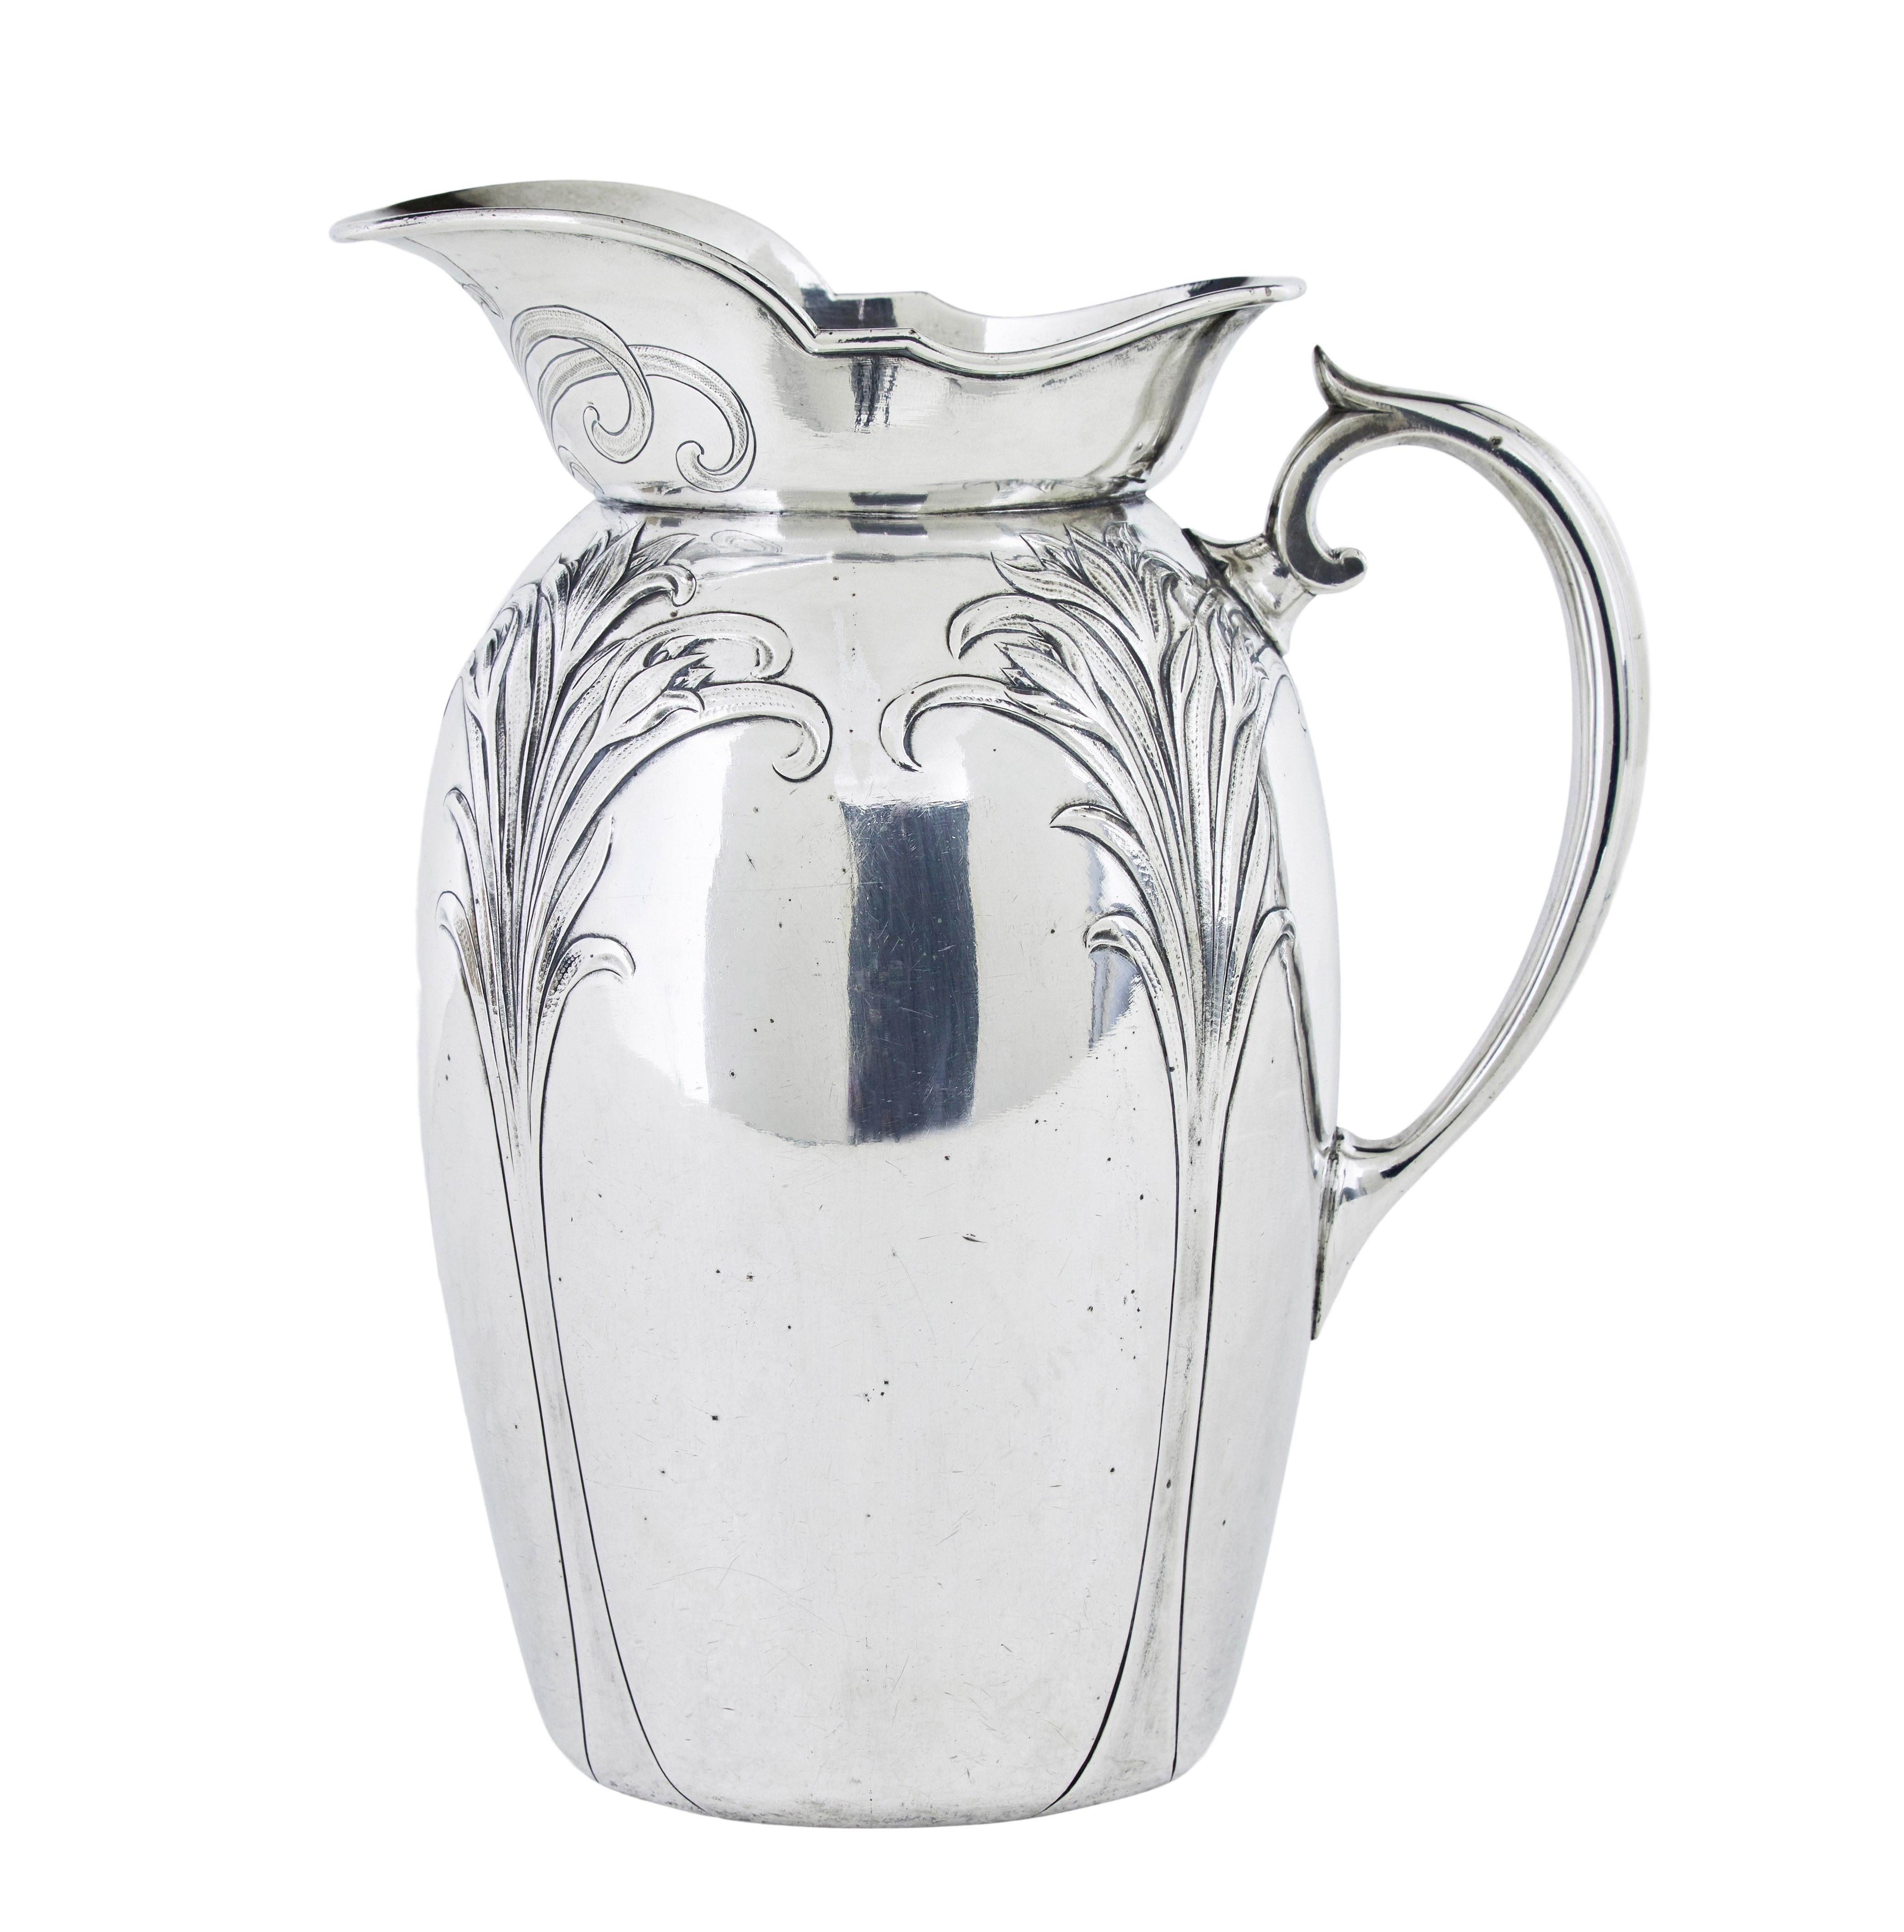 Art Nouveau silver plate jug and bowl by Christofle circa 1890

Fine quality jug and bowl by well known french makers Christofle. Rich in art noveau design with matching floral patterns. Jug with makers mark, firm name and '80', bowl also with both